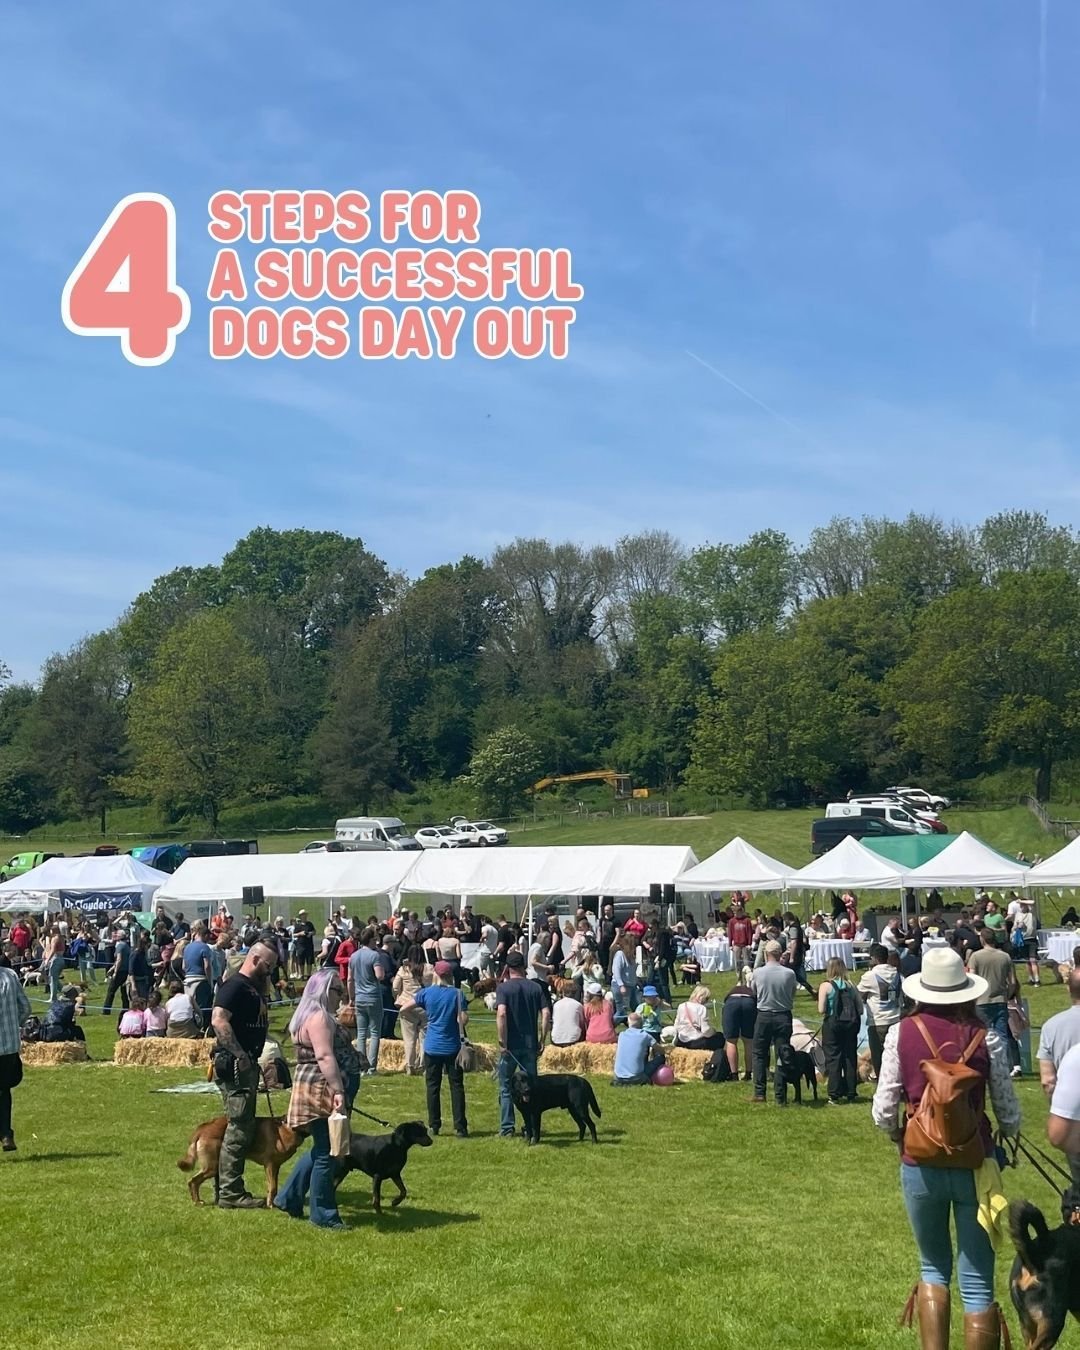 🐾 4 Steps for a Successful Dogs Day Out🐾...

1.⁠ ⁠Check the weather ☀️ (yes it&rsquo;s sunny!!) 
2.⁠ ⁠⁠Buy your tickets online 🎟 
3.⁠ ⁠⁠Enjoy FREE activities ALL day for your dog and your kids 🎉 
4.⁠ ⁠⁠Take everyone home very tired! 😴

What are 